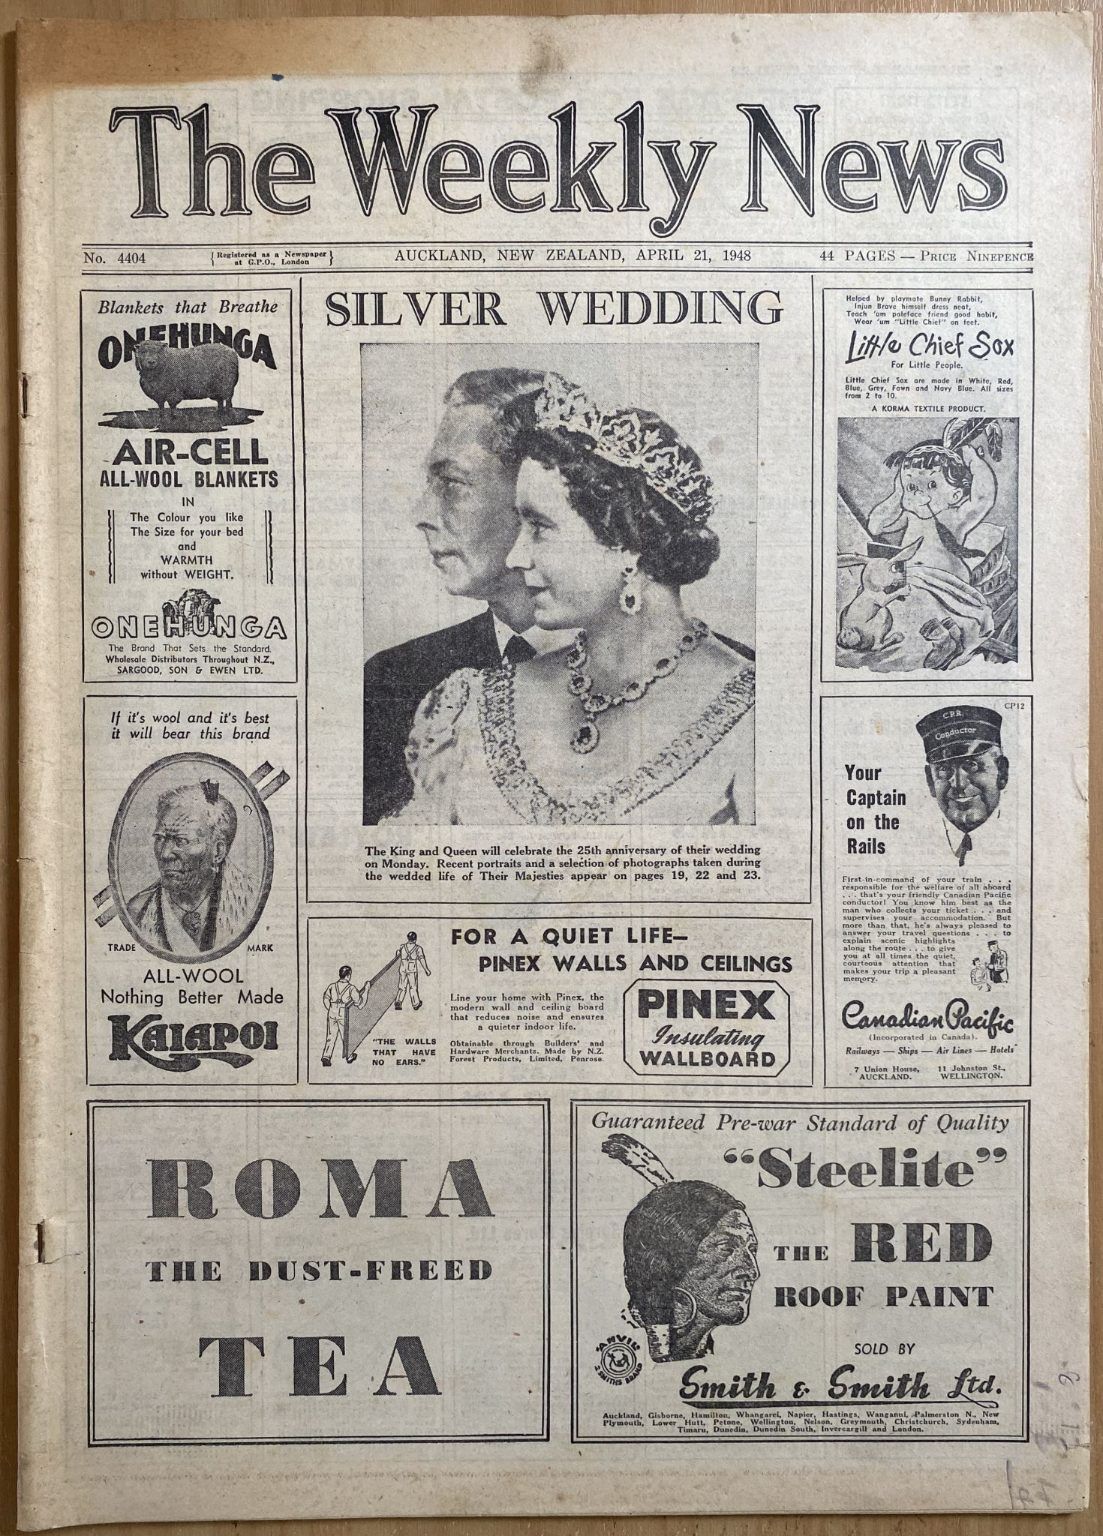 OLD NEWSPAPER: The Weekly News - No. 4404, 21 April 1948